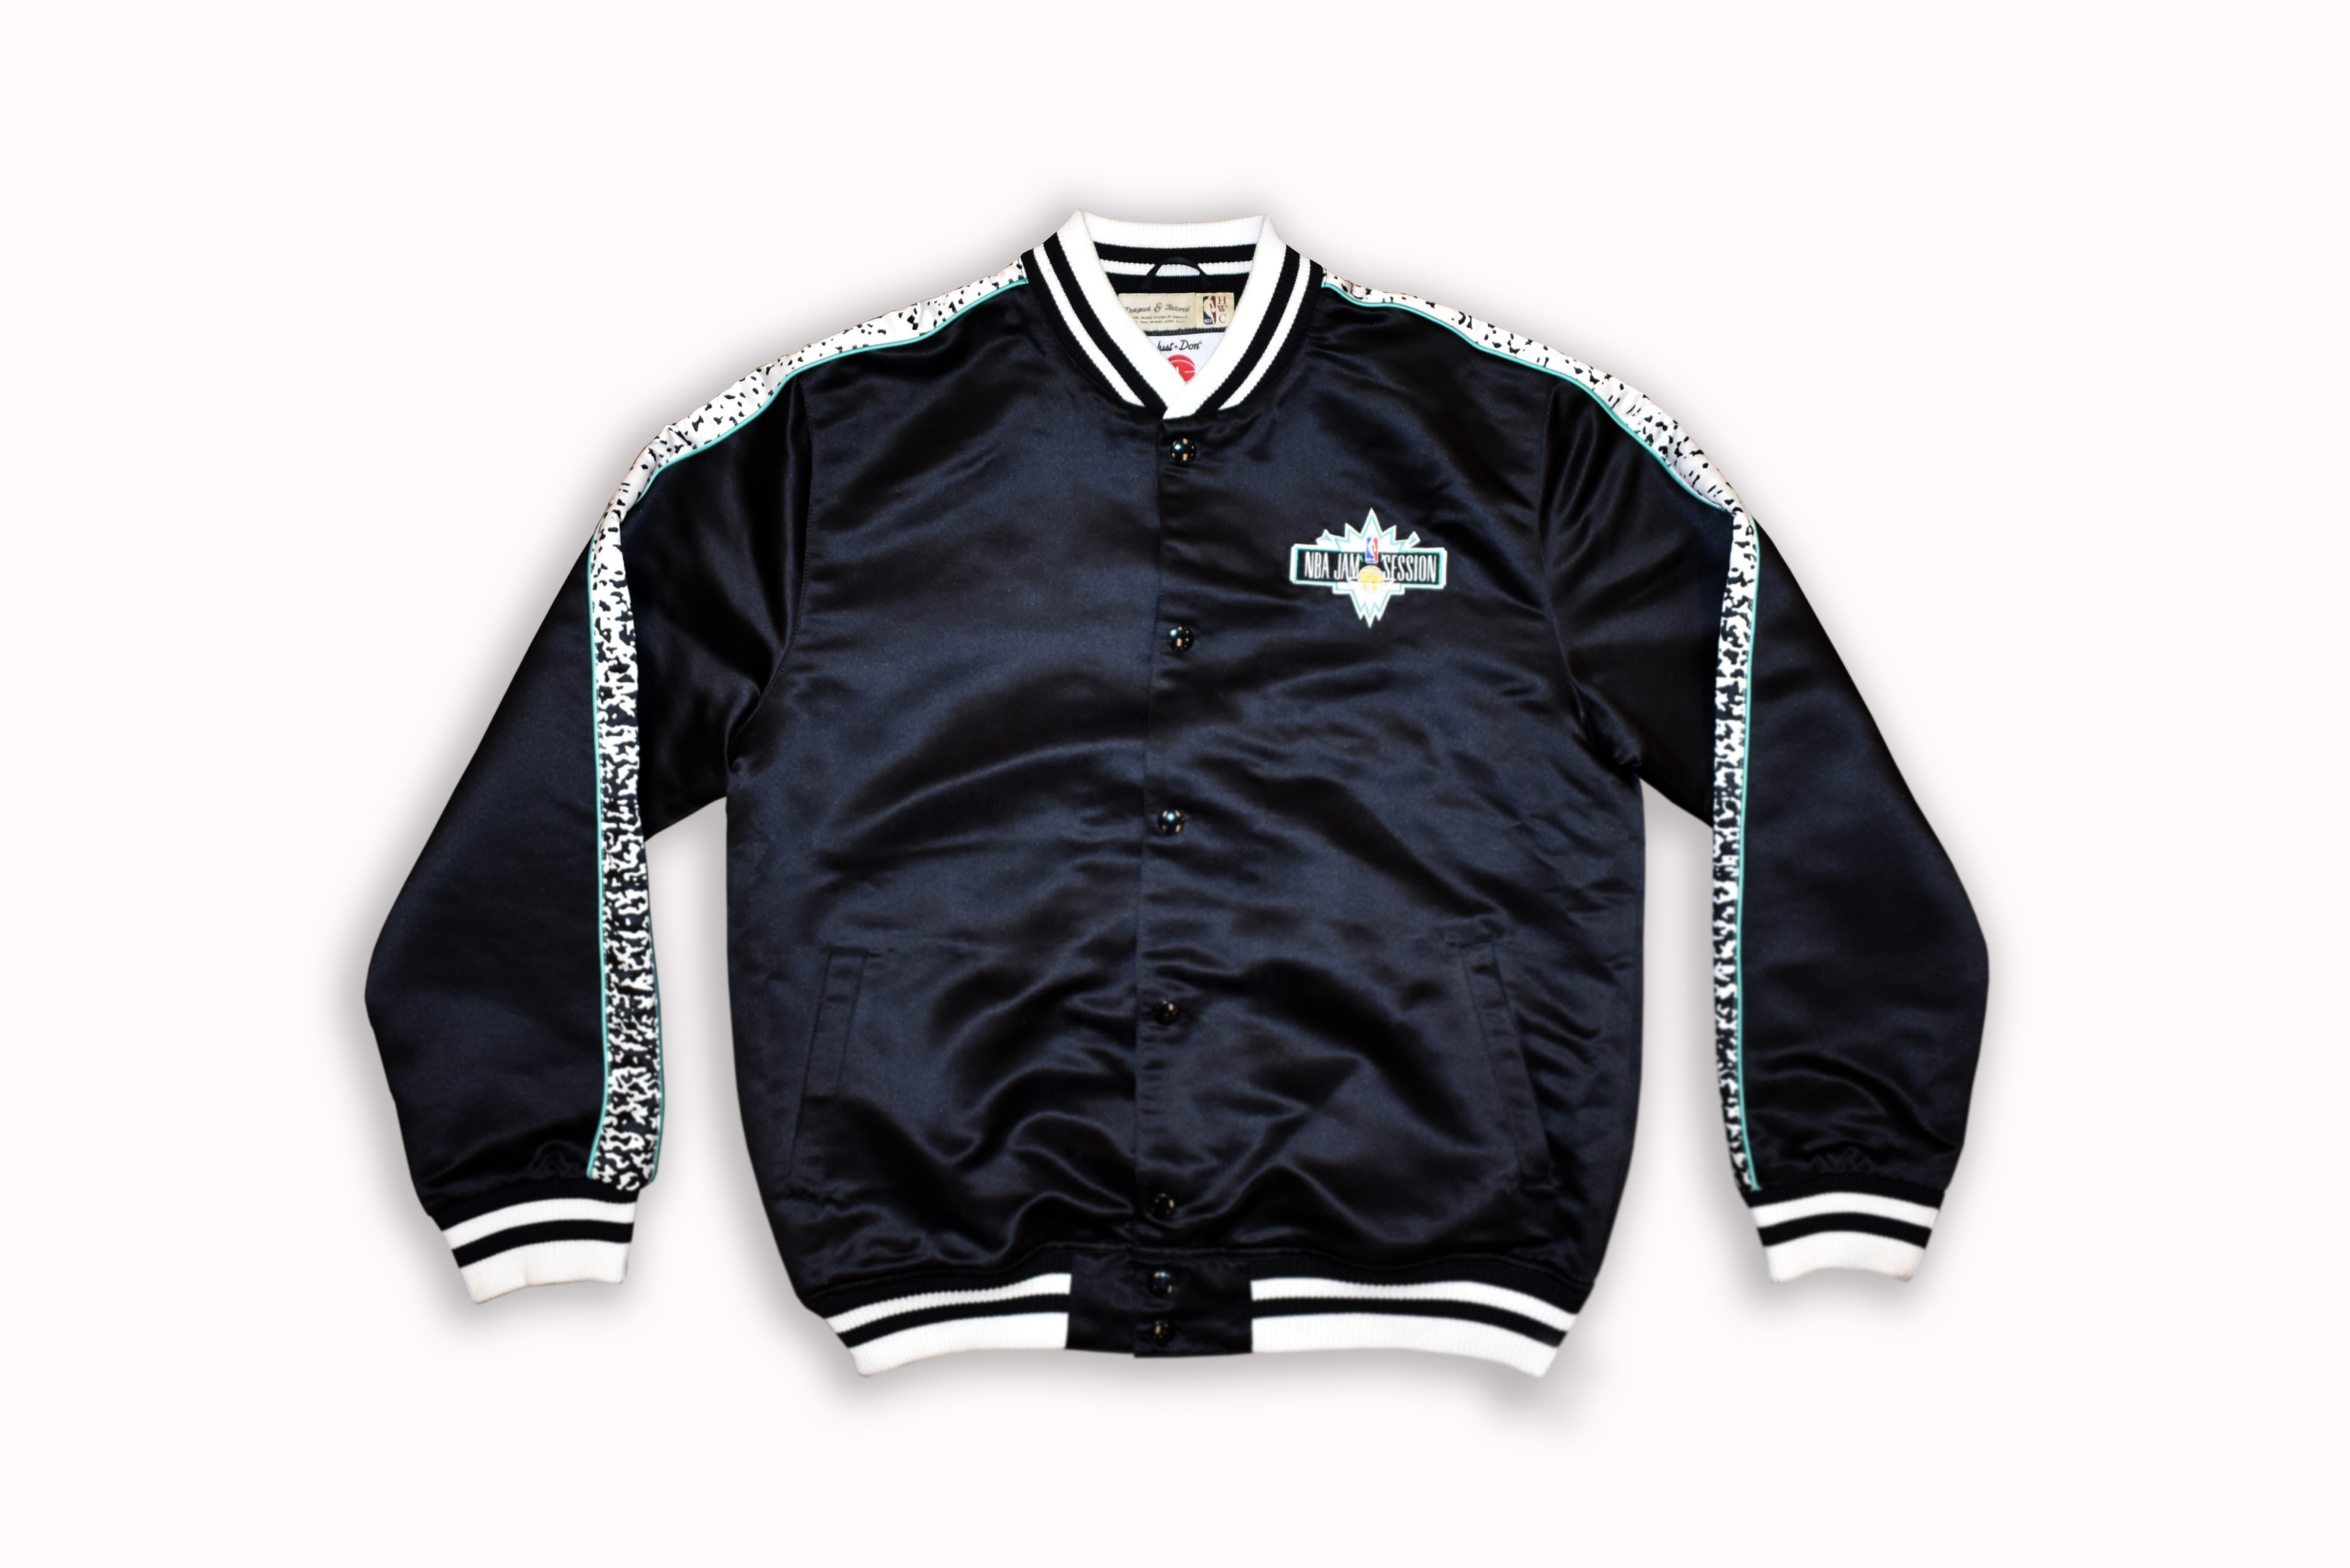 JUST DON®  Just Don × @mitchellandness 1993 NBA All Star Capsule